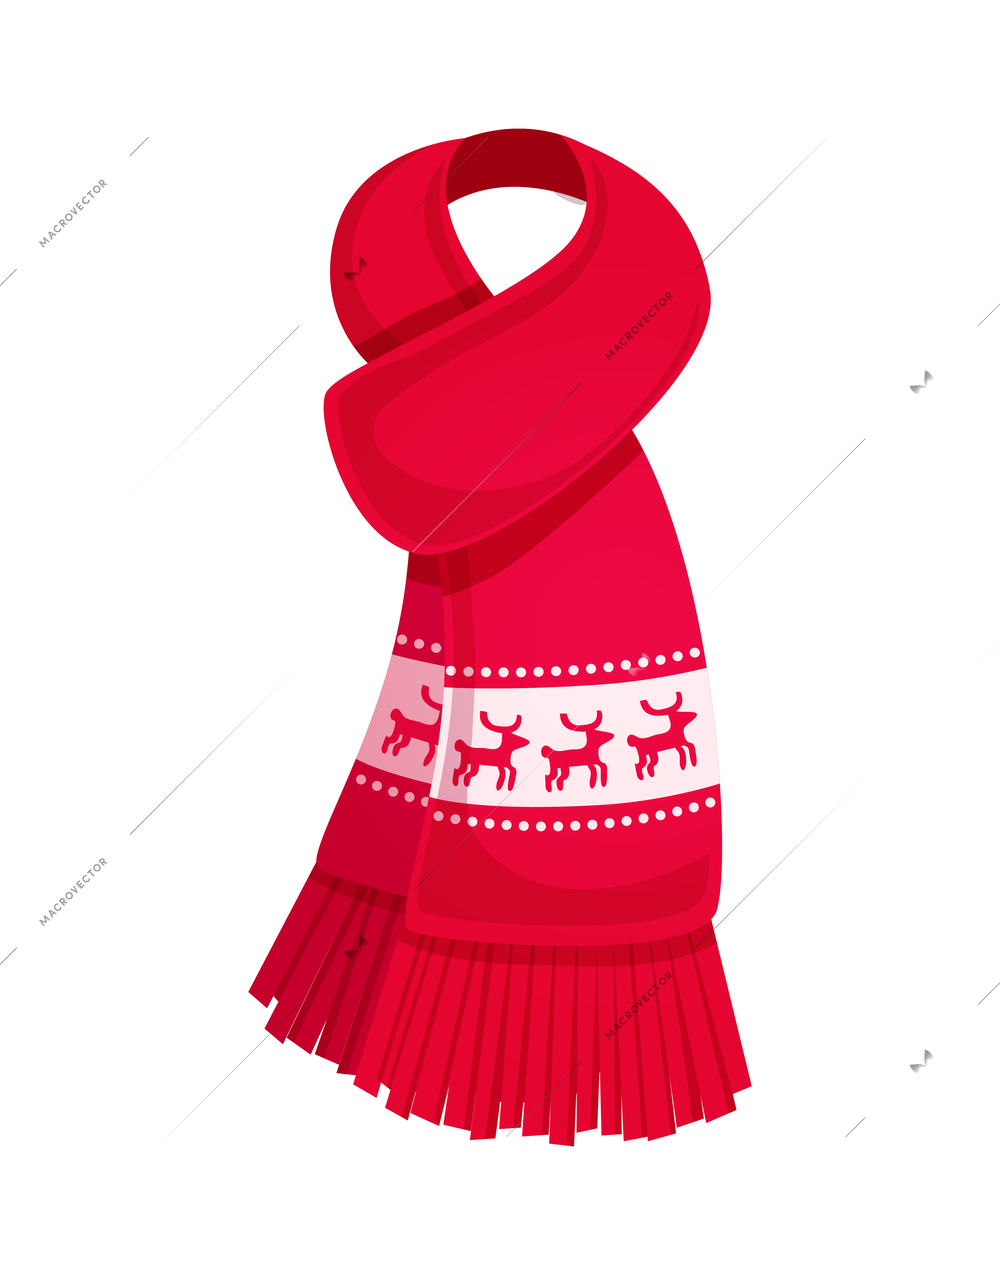 Seasonal winter clothes composition with isolated image of stylish warm clothing item on blank background vector illustration